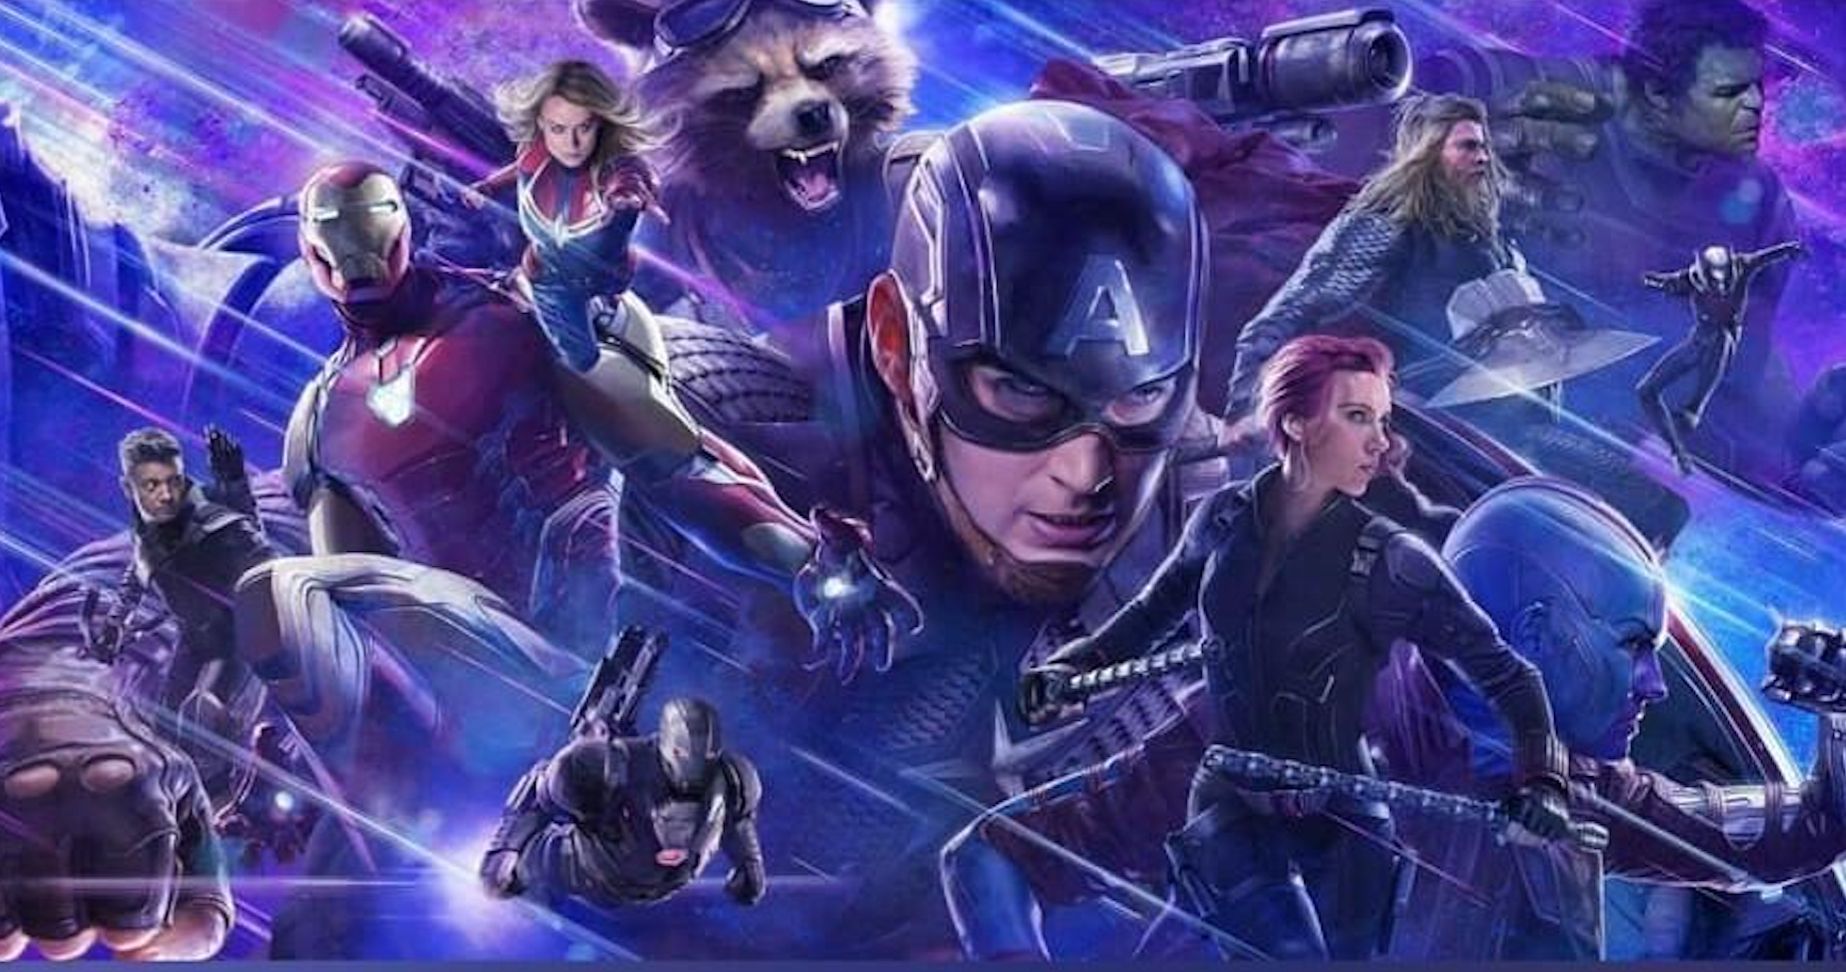 Avengers: Endgame Is the Best Superhero Movie of All Time According to New Study